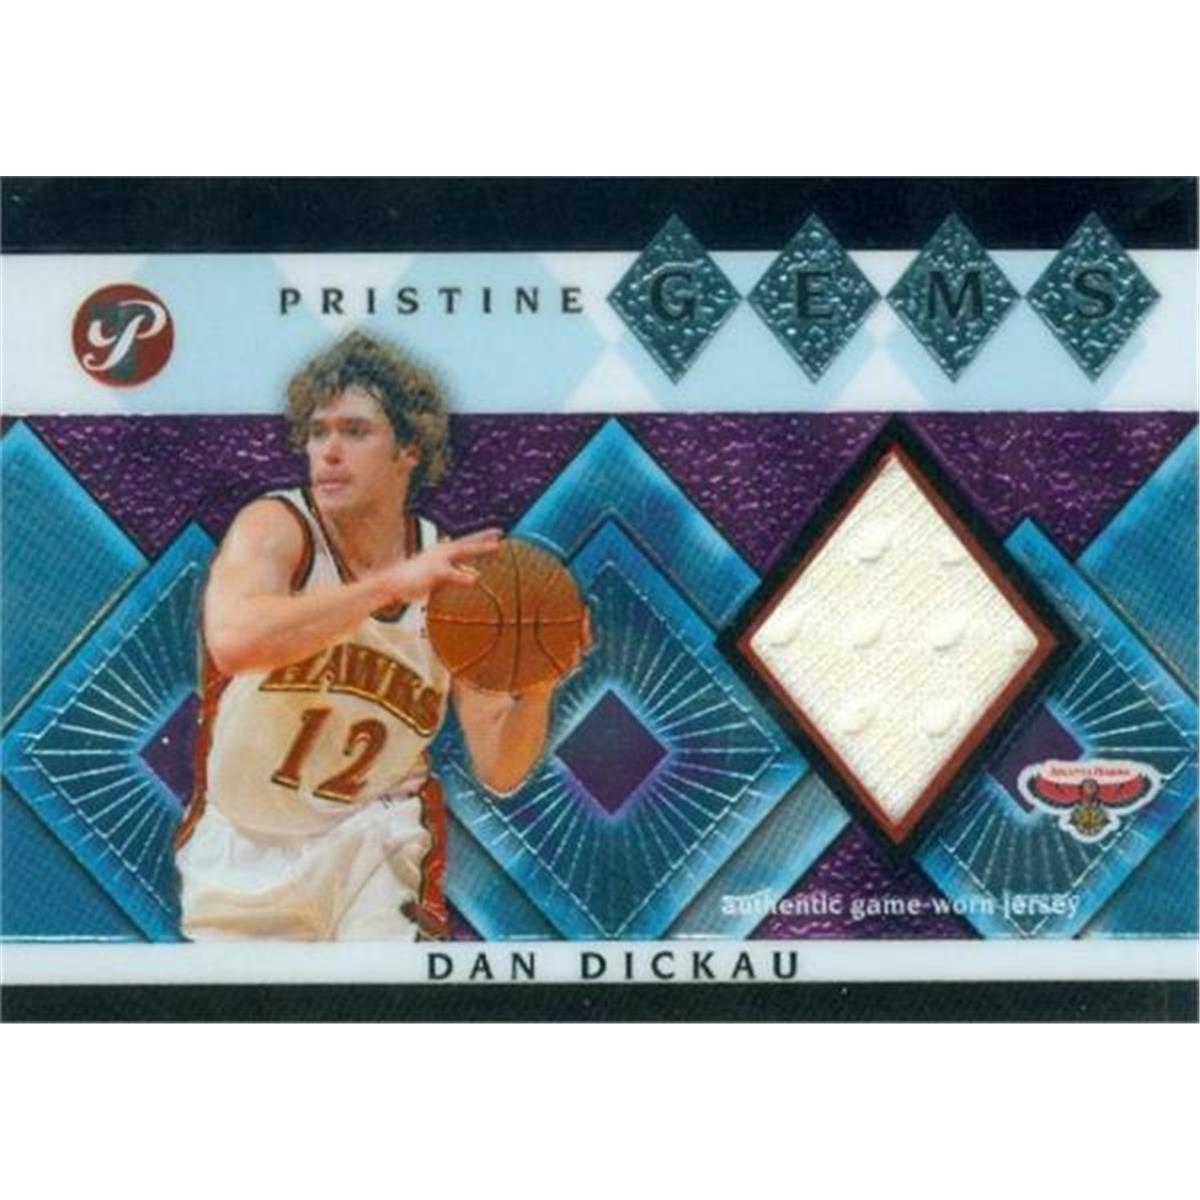 Picture of Autograph Warehouse 409118 Dan Dickau Player Worn Jersey Patch Basketball Card - 2003 Topps Pristine Gems-GEMDD